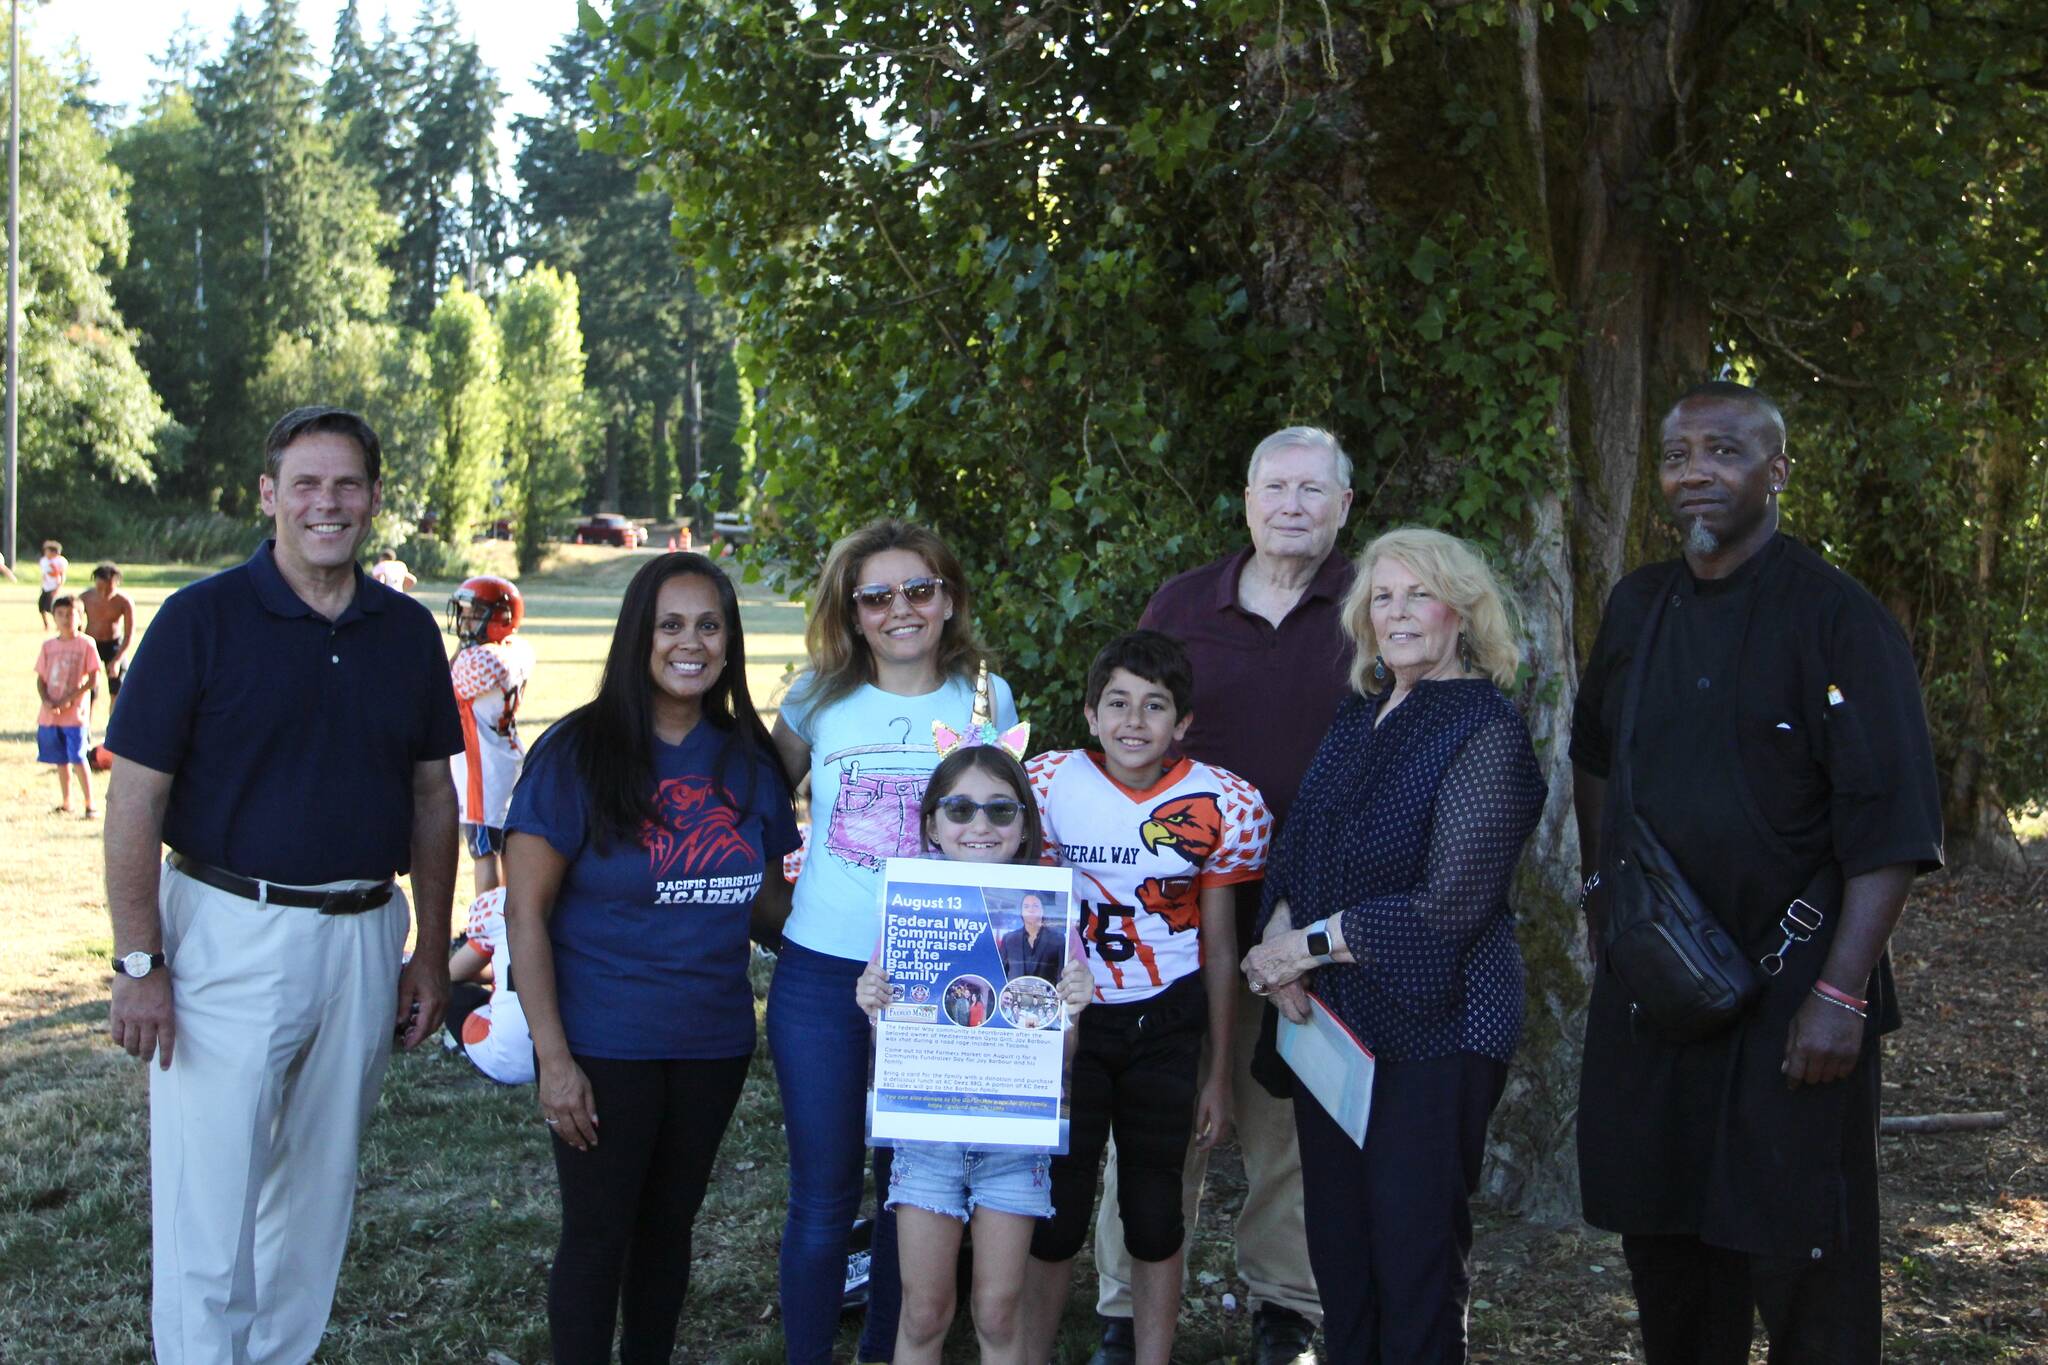 Marwa Almasri, center in blue, accepted a $1,000 donation on behalf of Jay Barbour on Aug. 16. The donation funds were collected by community donations and a portion of sales from K.C. Deez BBQ. From left: Mayor Jim Ferrell; Eileen Wilson of Pacific Christian Academy; Marwa Almasri and her daughter, Nai Barbour and her son, Majed Barbour; Rose Ehl of the Federal Way Farmers Market and her husband, Dave; and K.C. Deez BBQ owner De Davis. Olivia Sullivan/the Mirror